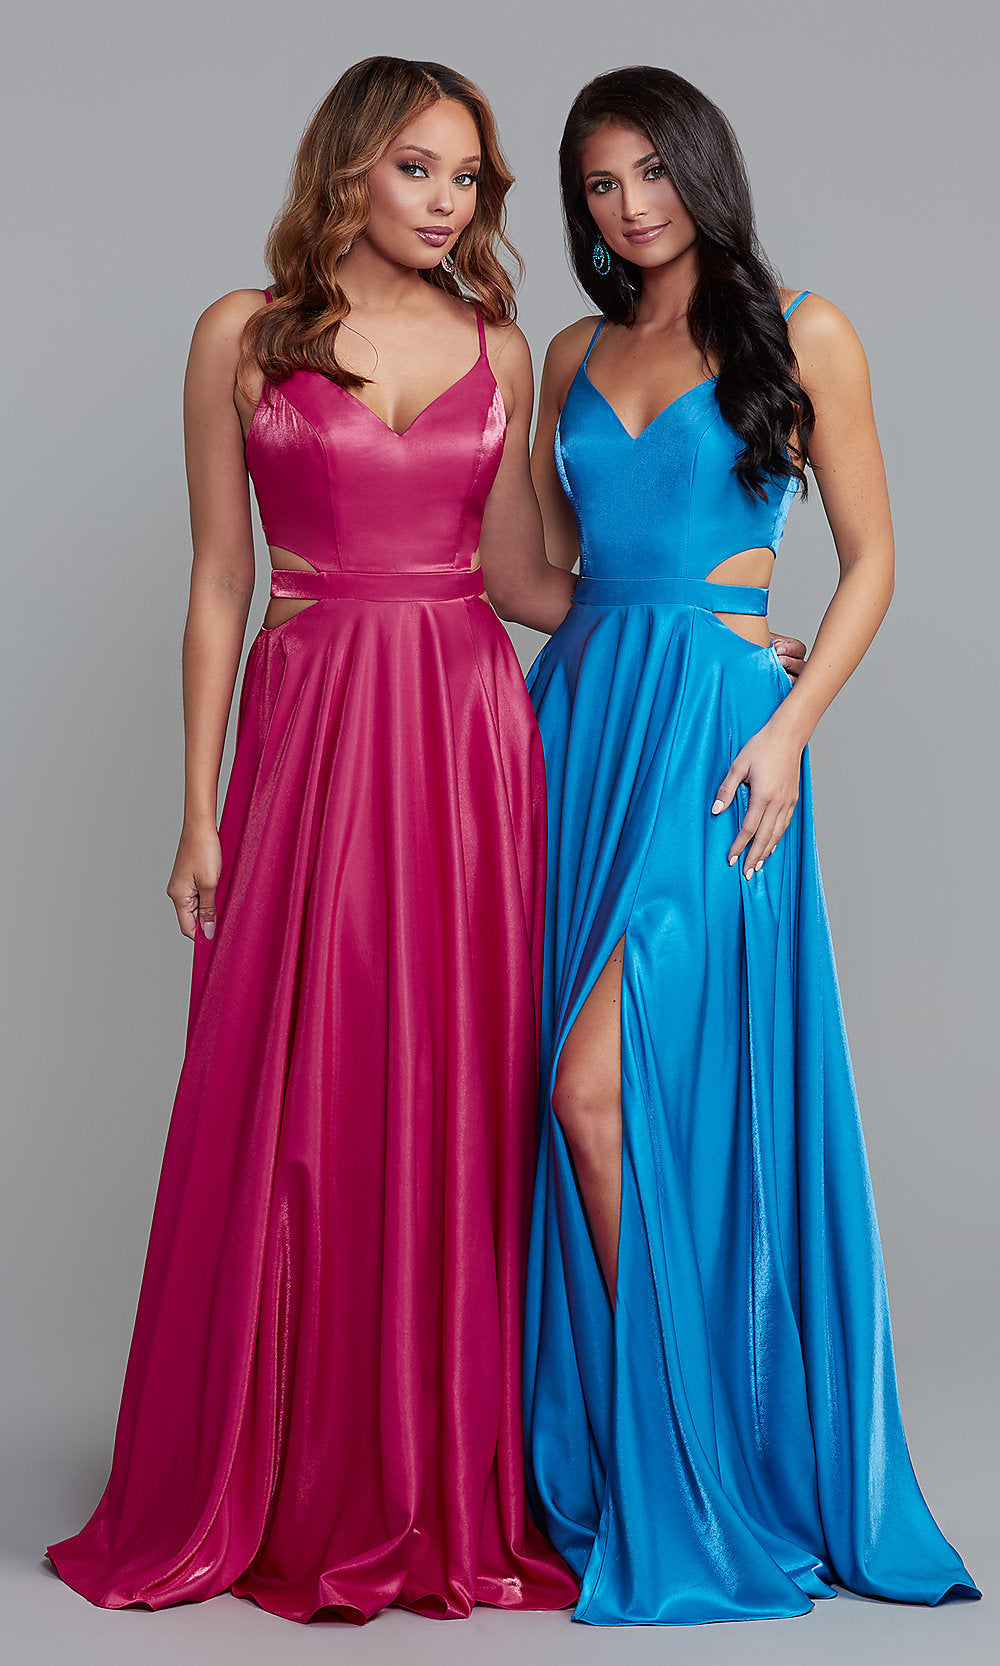 Fuchsia Shimmer Long Shimmer Formal Prom Dress with Side Cut Outs